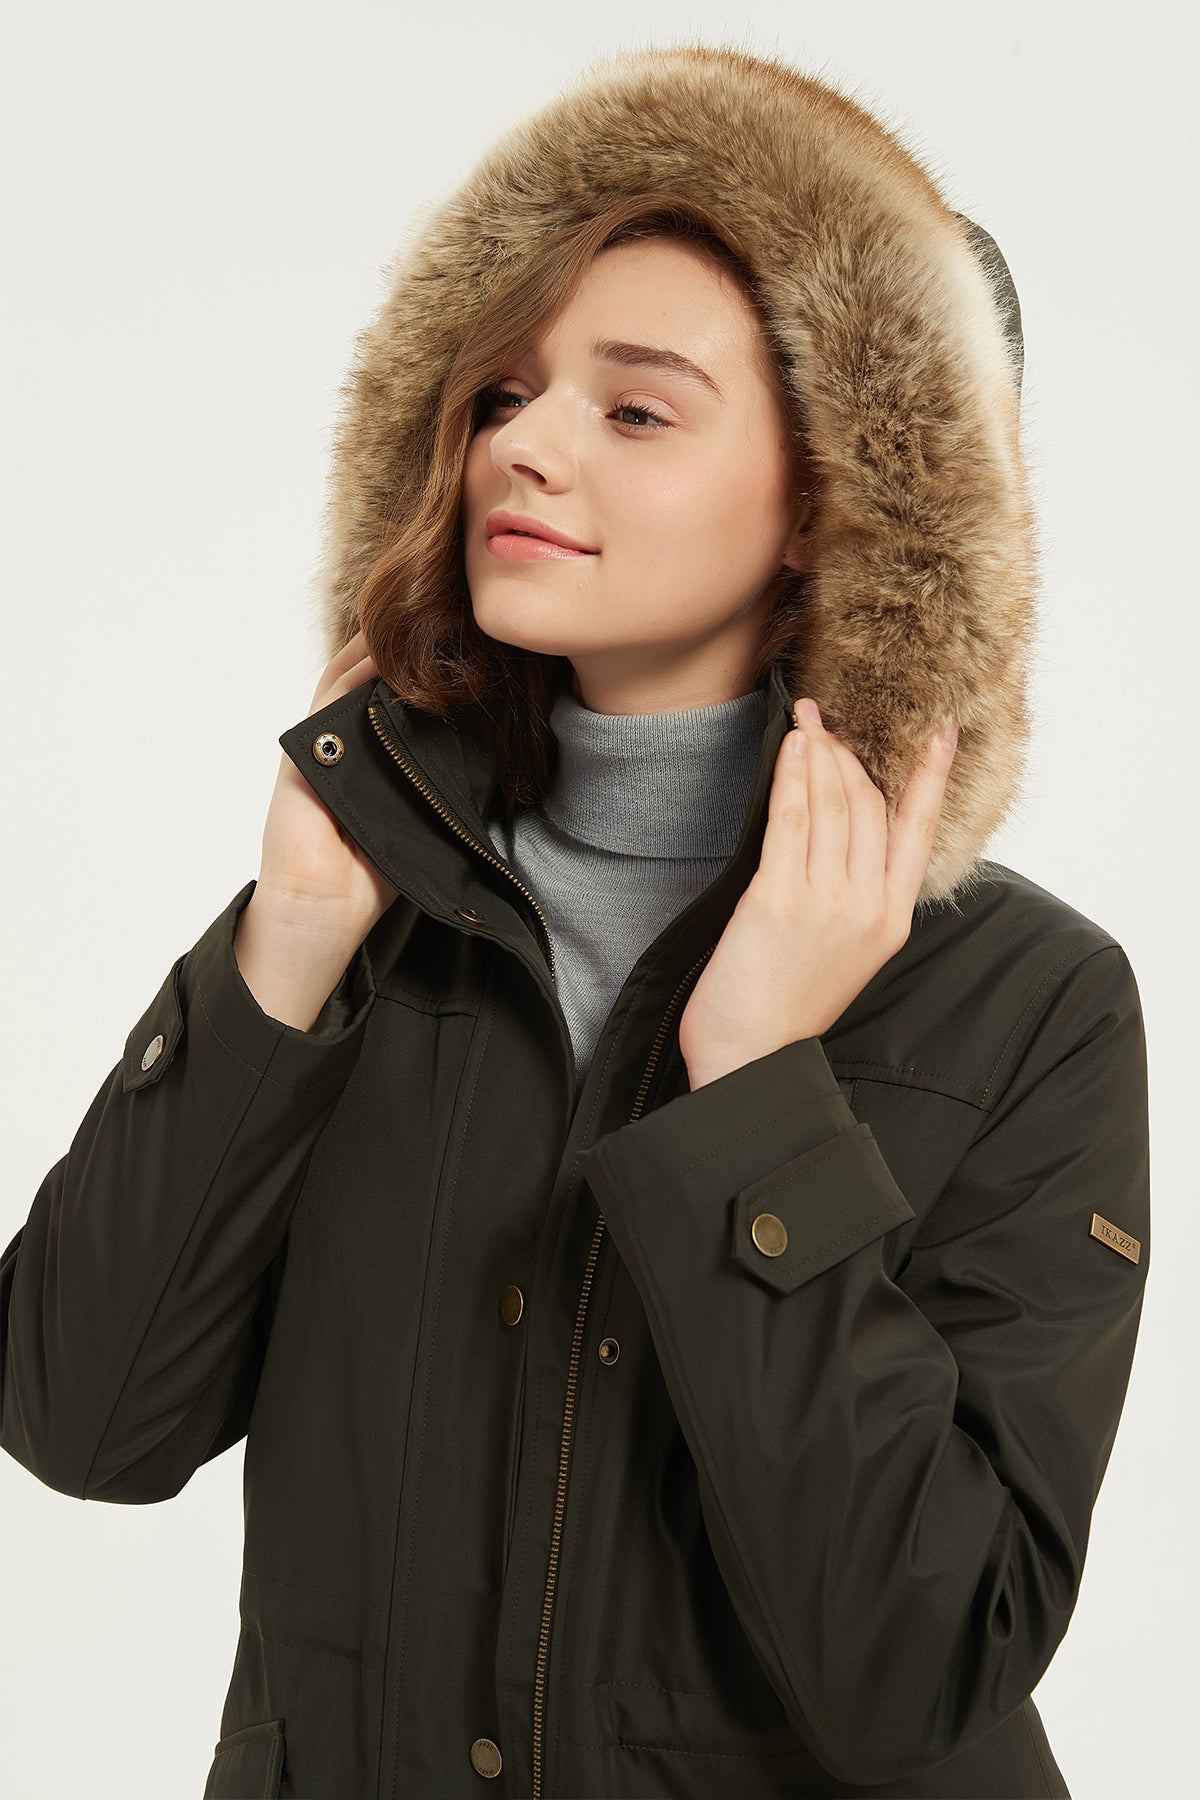 Drawstring Waist Parka Jacket with Removable faux fur hood